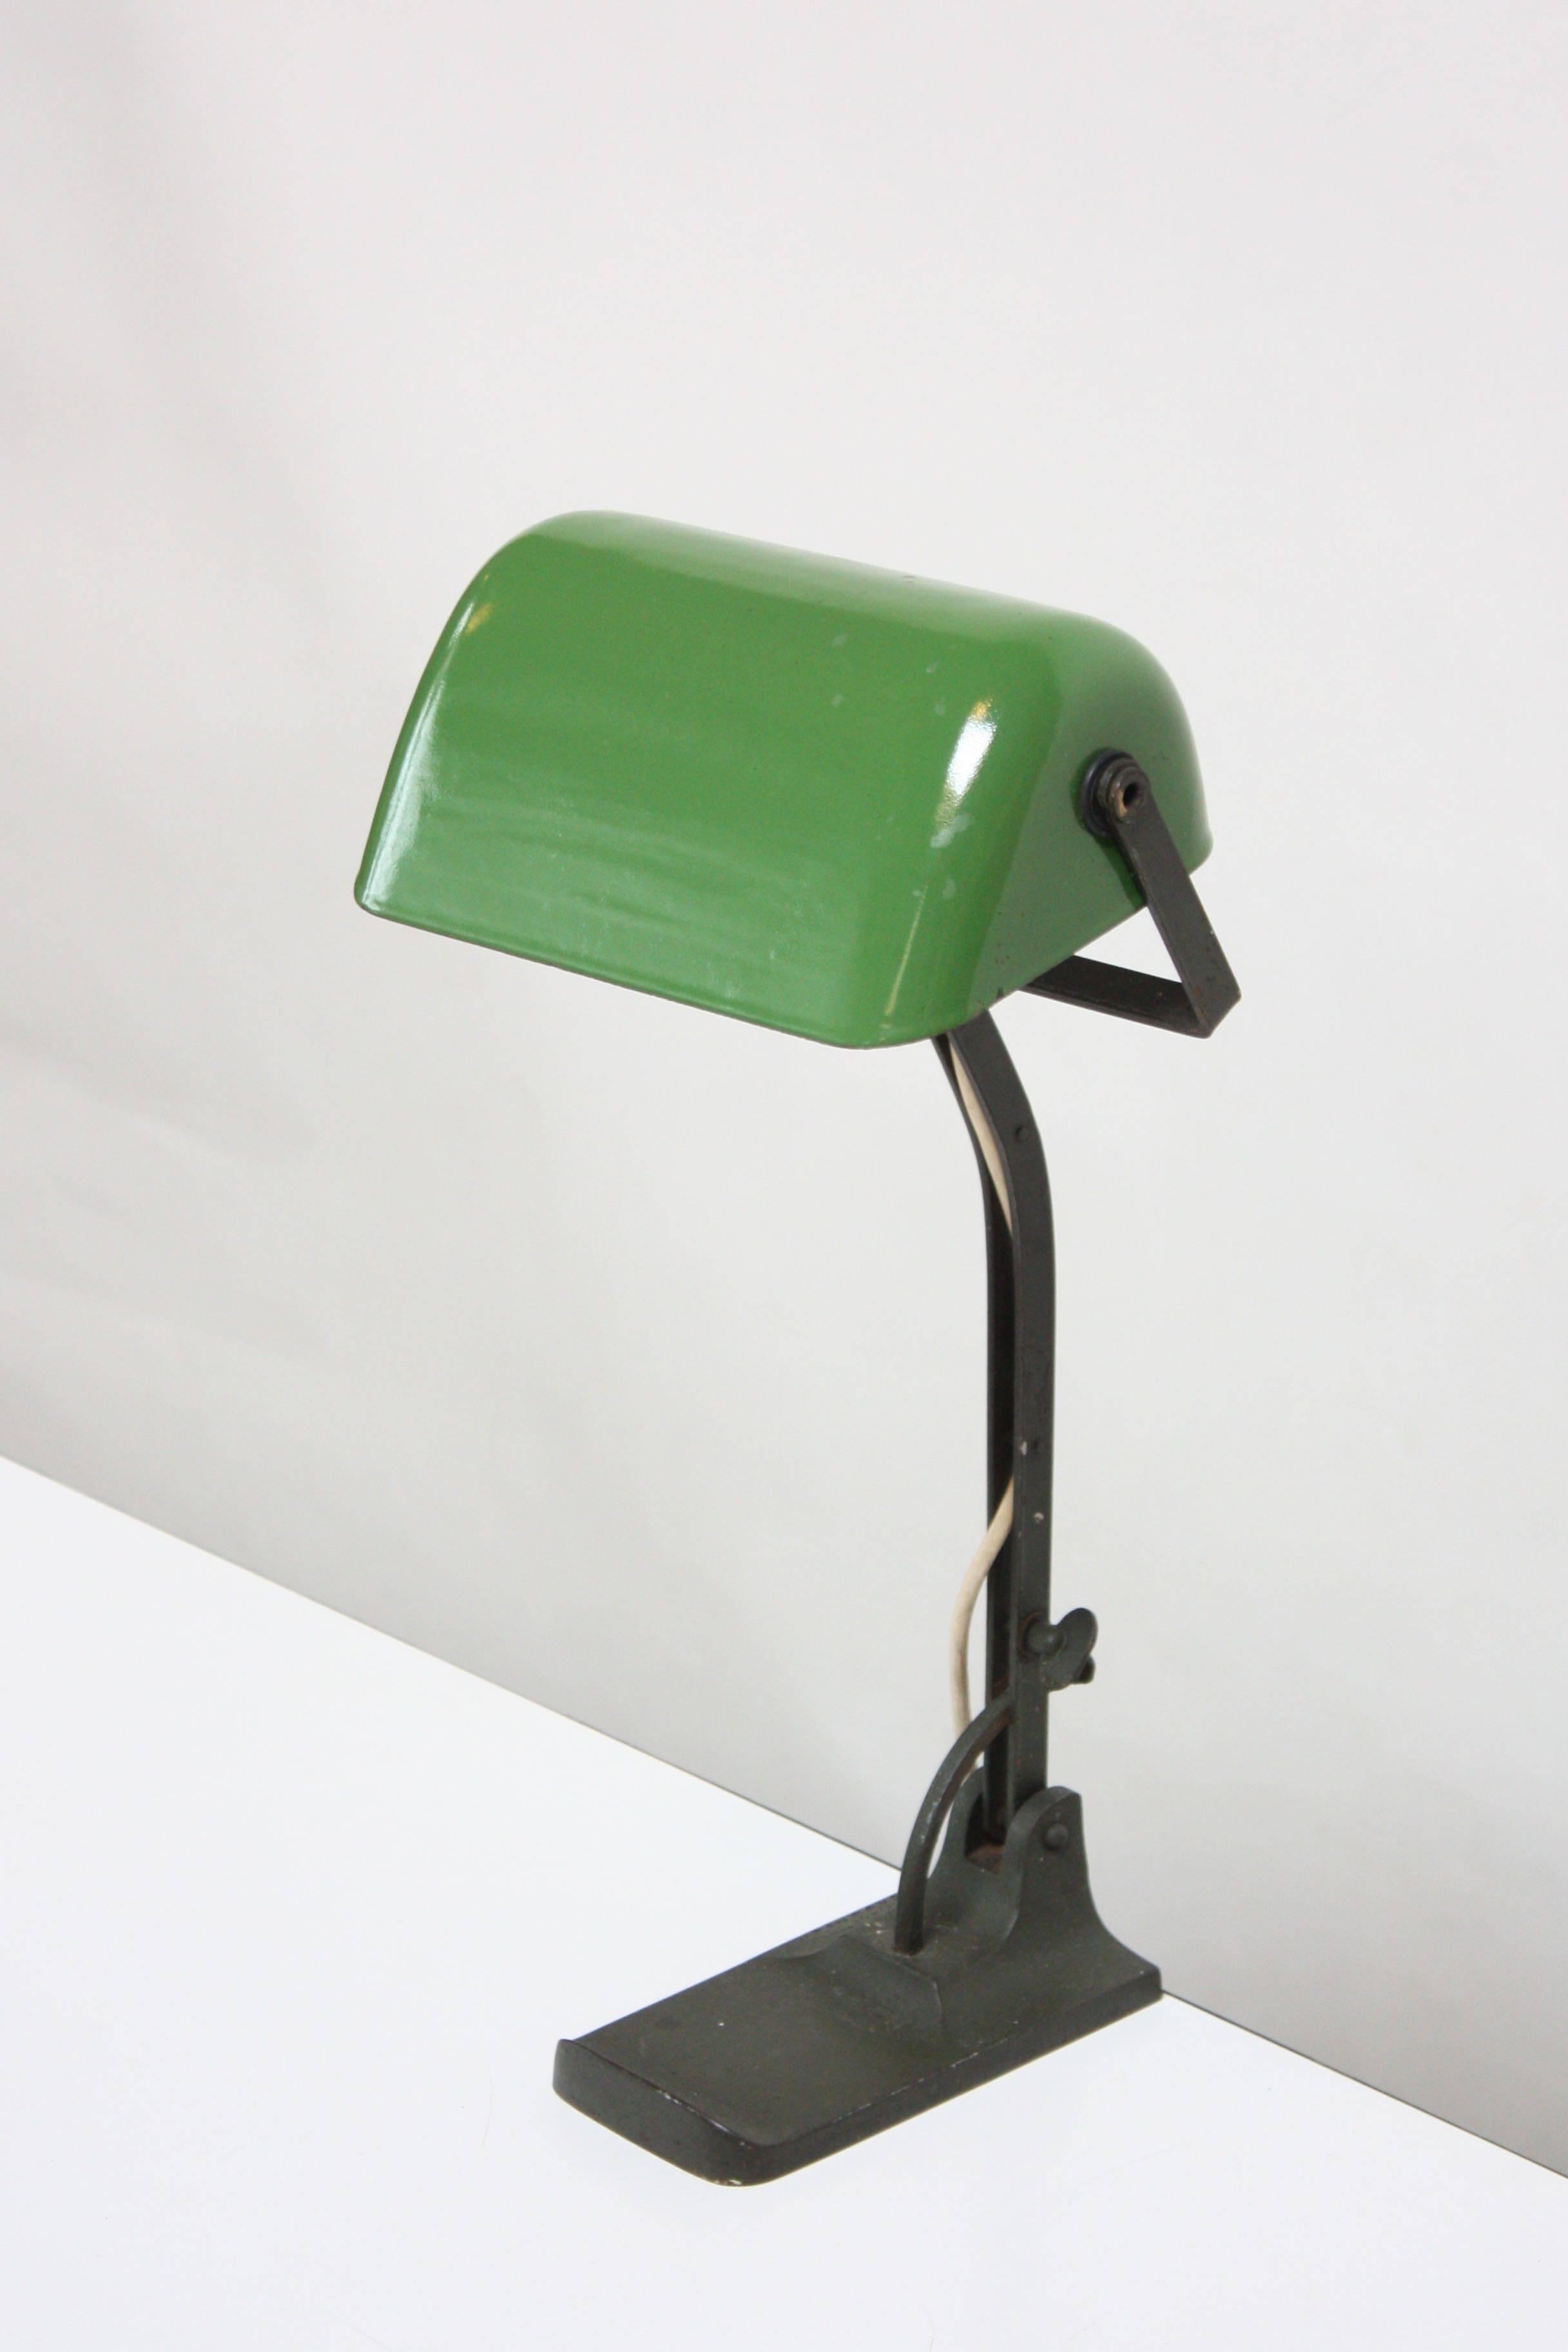 Adjustable workshop / banker's lamp by Astral (Austria circa late 1930s - early 1940s) featuring a cast metal base / stem and porcelain enameled-metal green shade. Shade and stem are adjustable (height can only be adjusted at an angle as shown, not